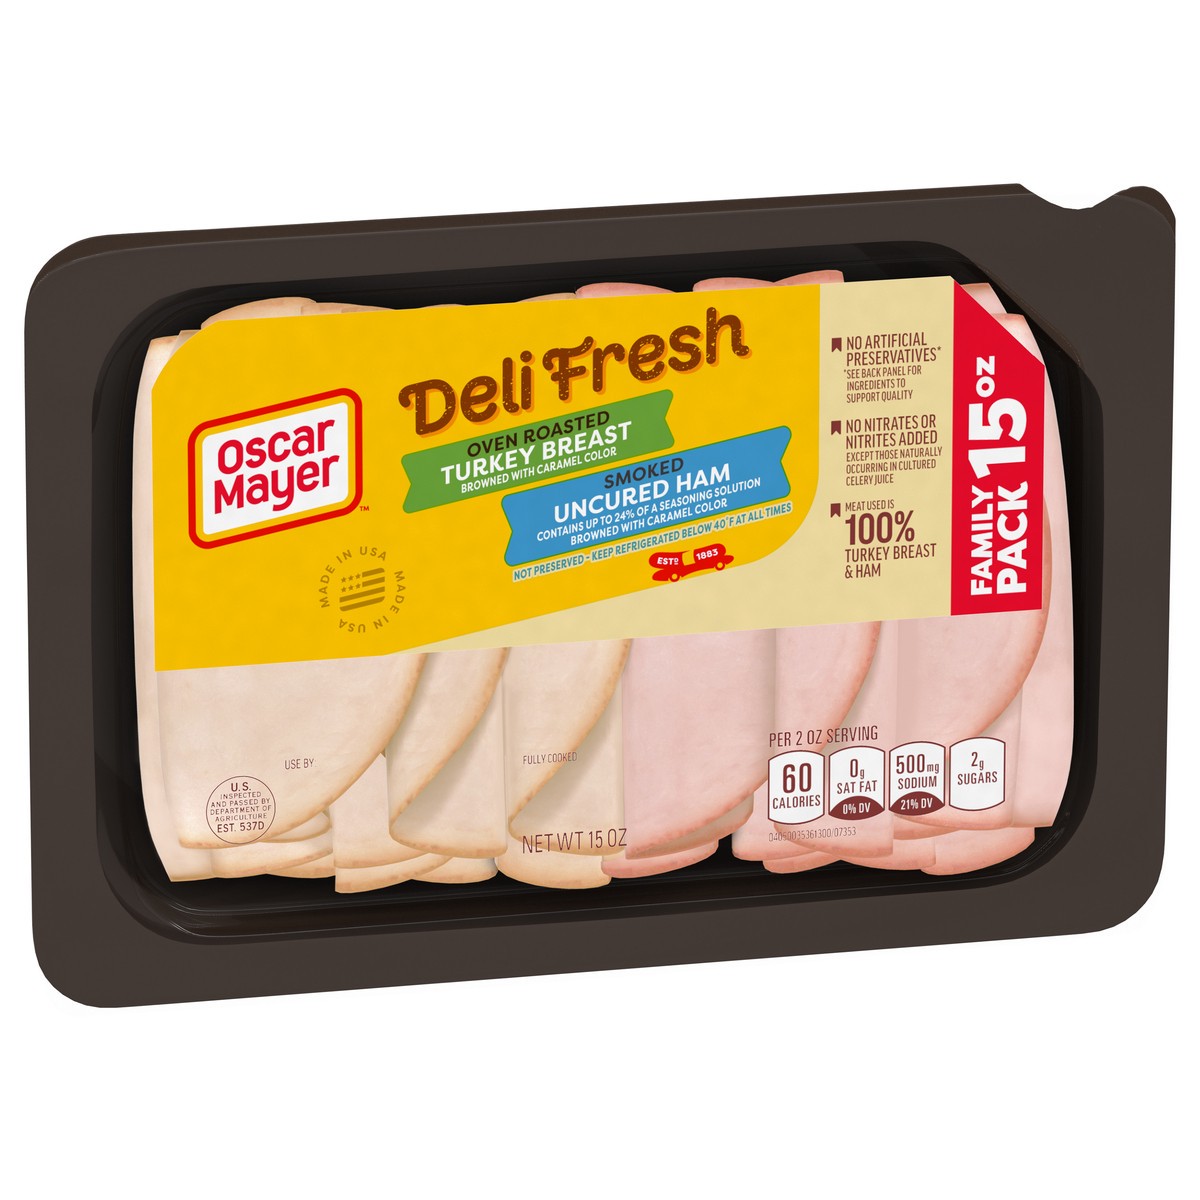 slide 3 of 9, Oscar Mayer Deli Fresh Oven Roasted Turkey Breast & Smoked Uncured Sliced Ham Deli Lunch Meats Variety Pack Family Size, 15 oz. Tray, 15 oz